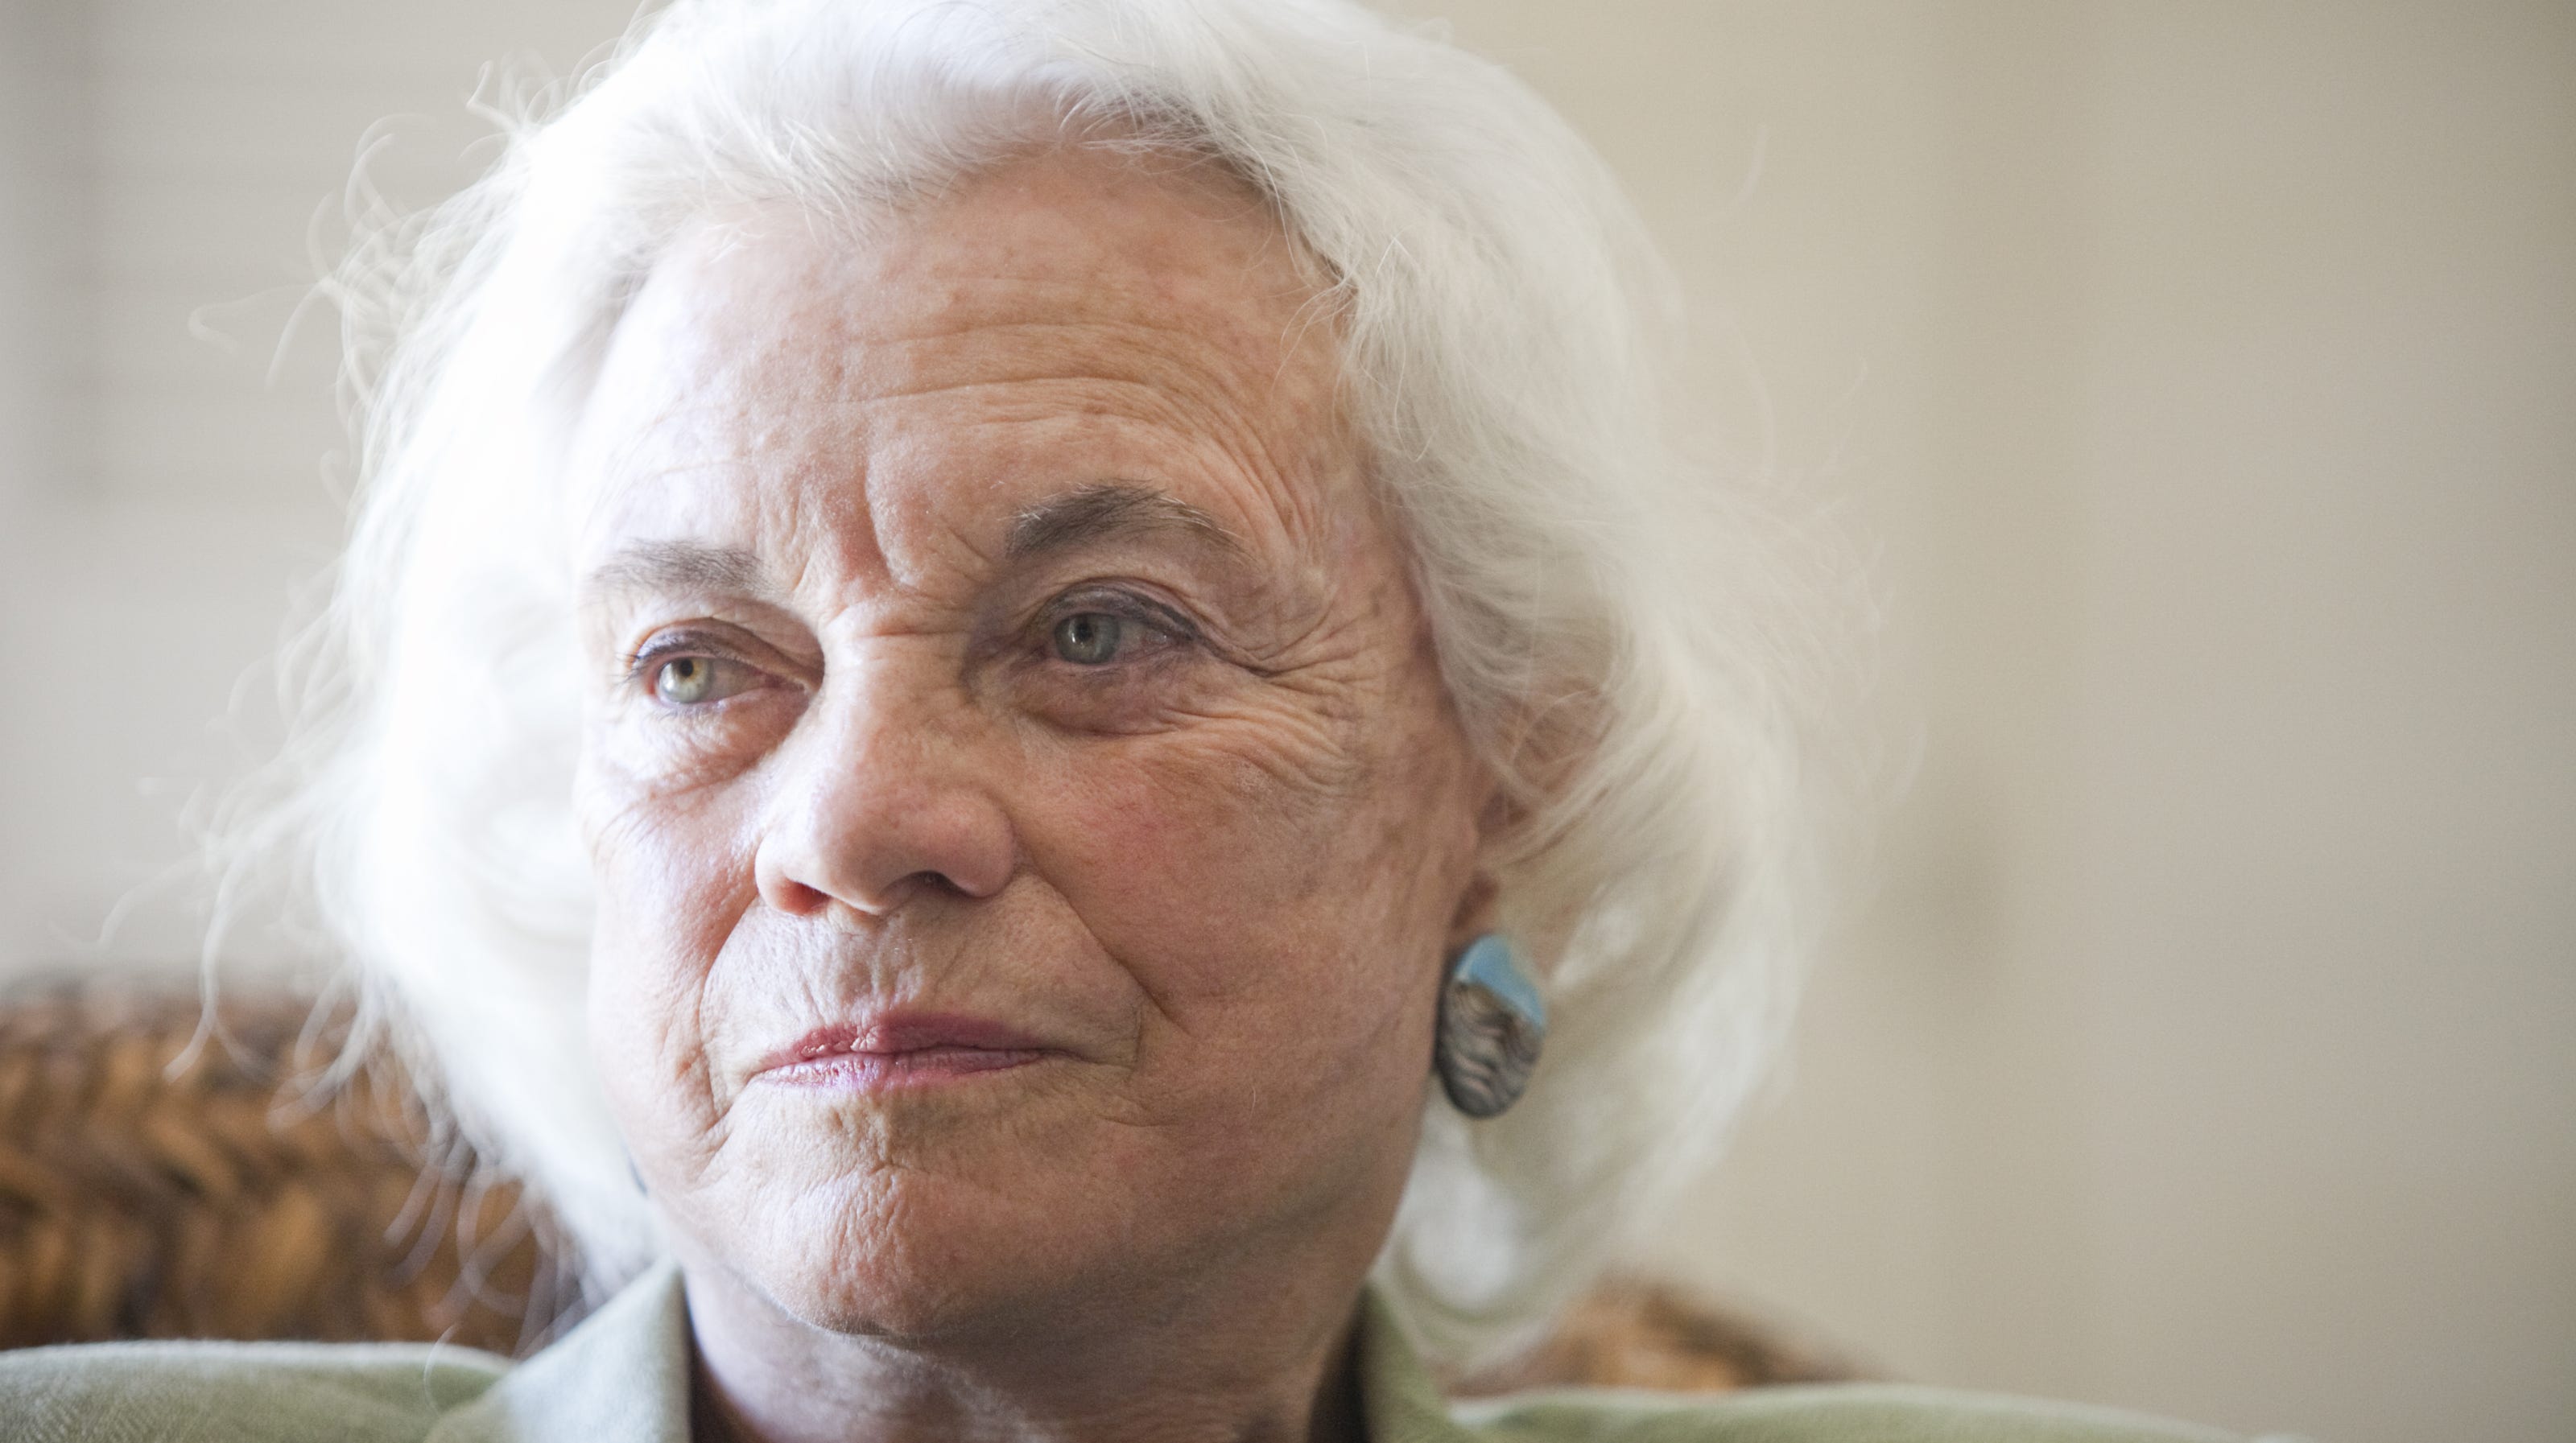 Sandra Day O'Connor, first woman on the Supreme Court, turns 89 March 26